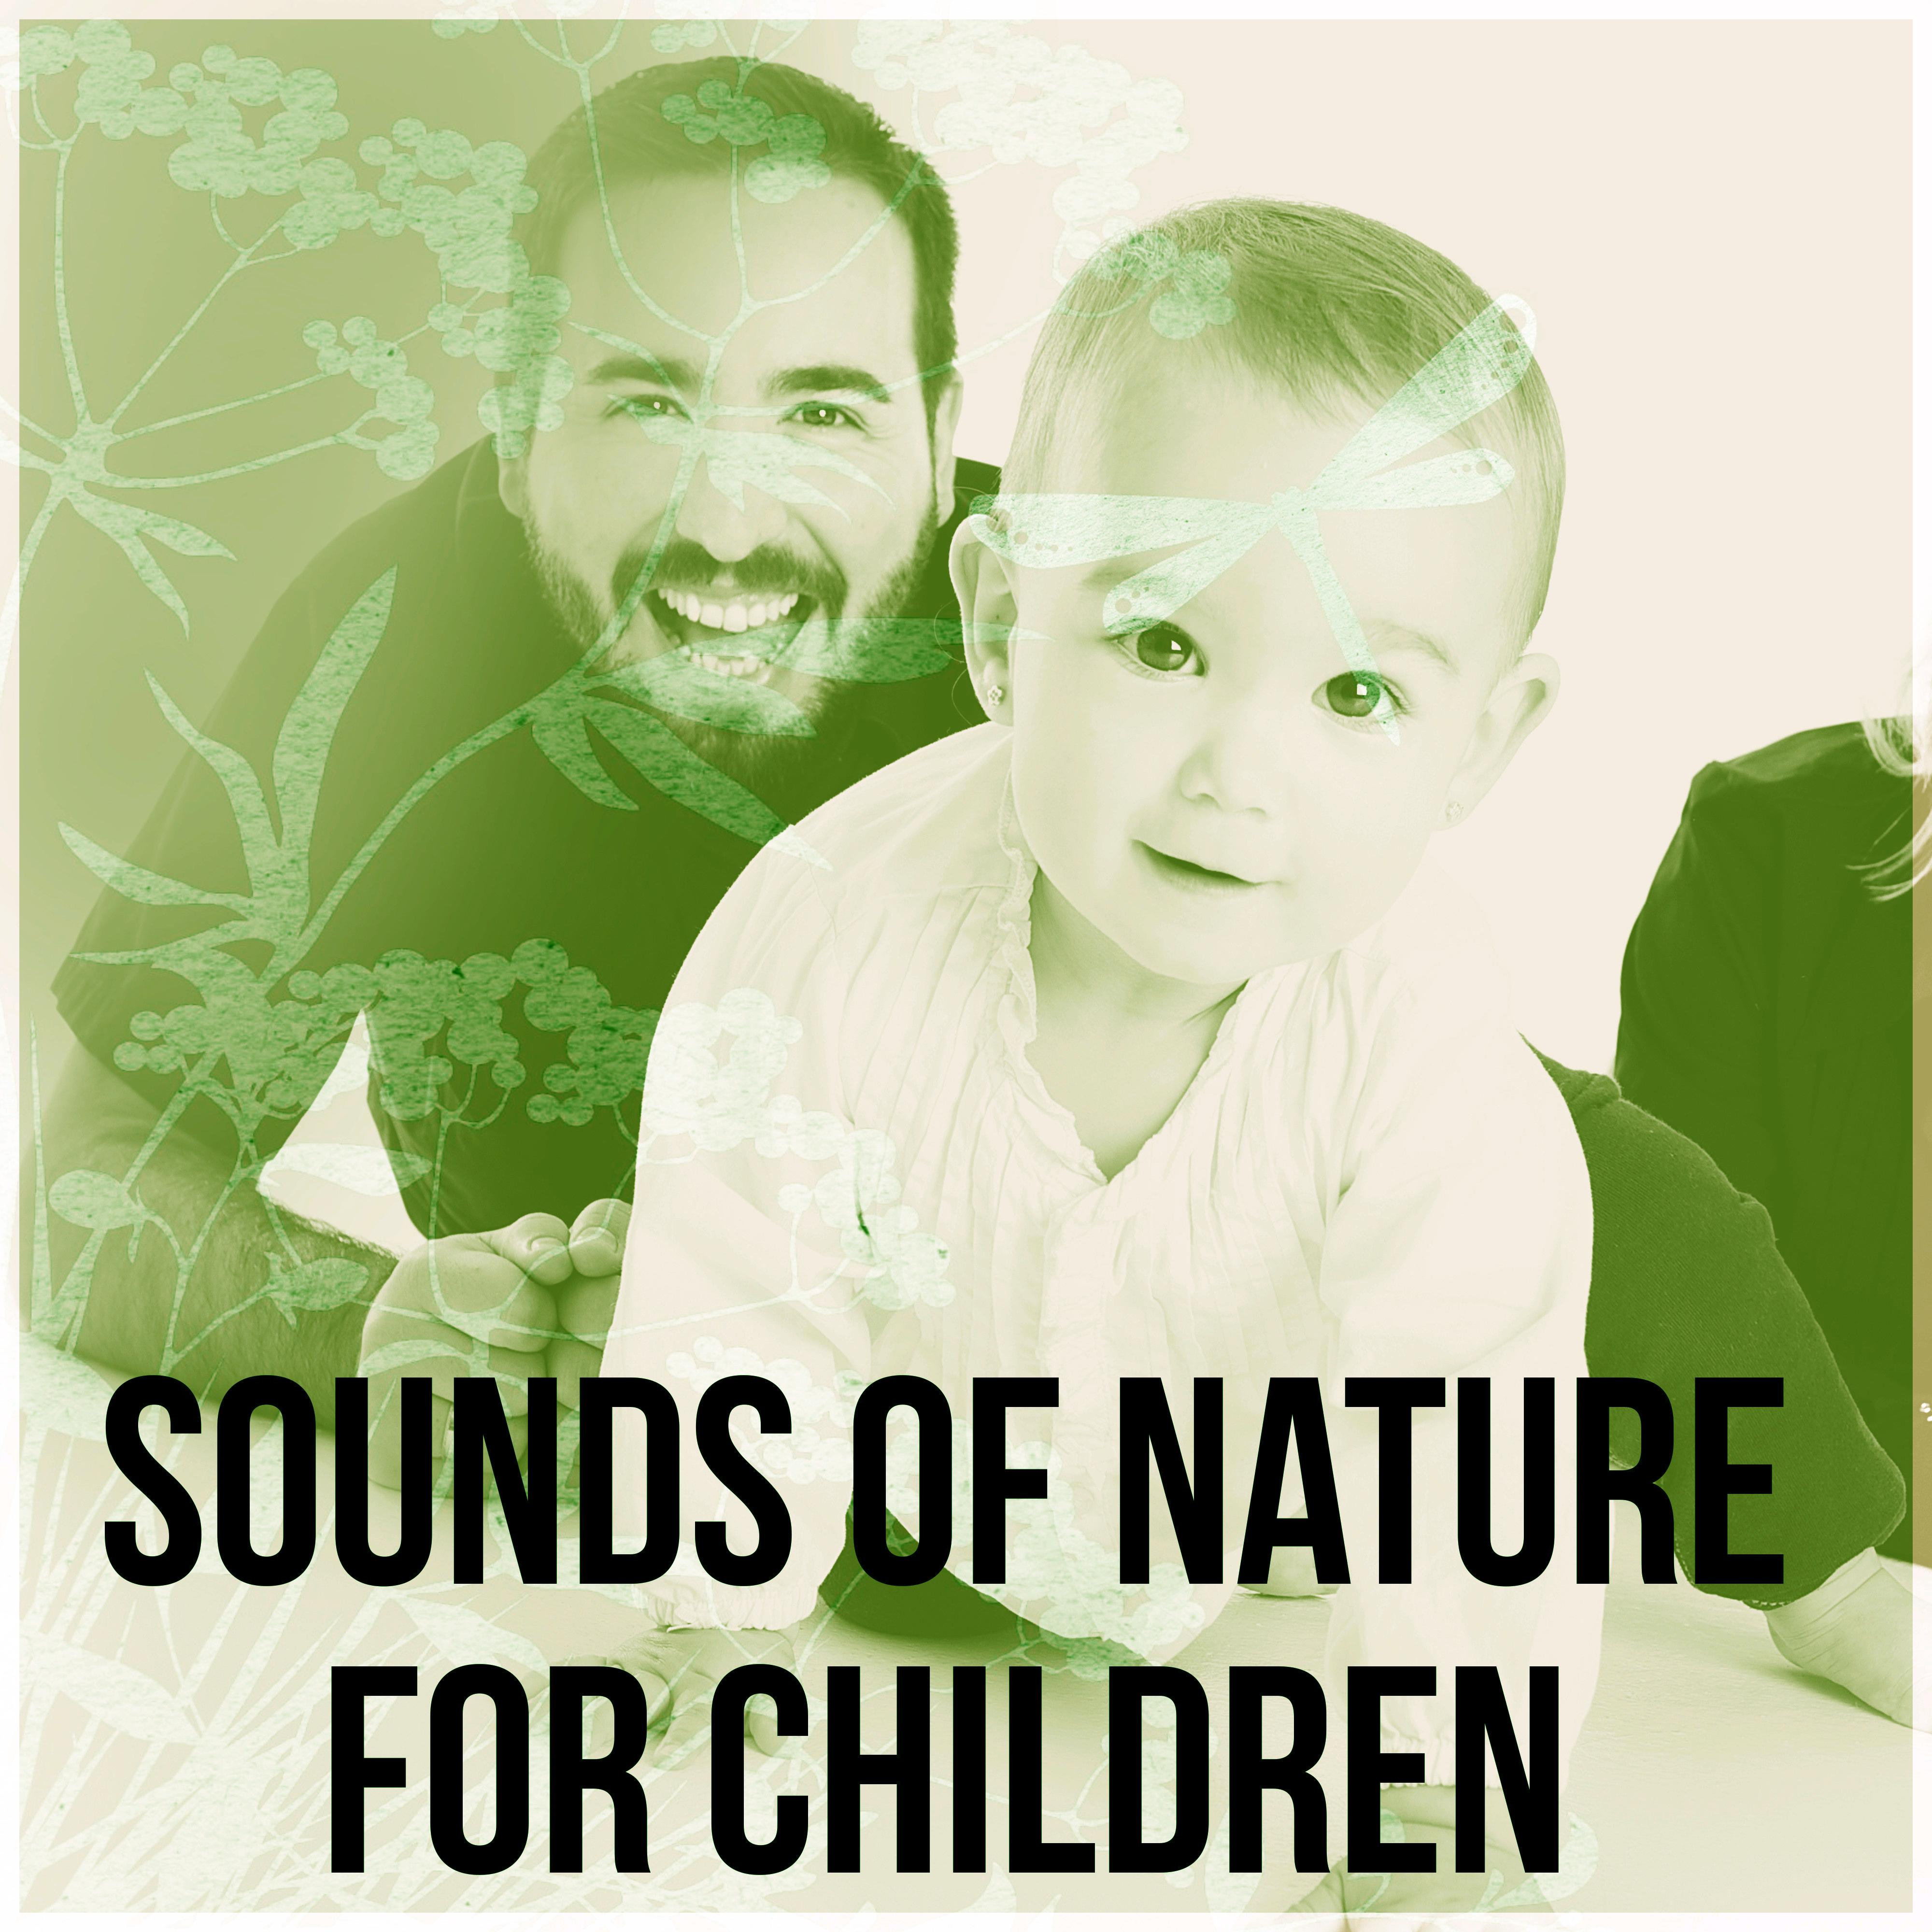 Sounds of Nature for Children - Baby Lullabies, Relaxing Nature Music, Soft Sound for Baby Sleeping, Peaceful Music, Calm Music, Relax Music for Healing